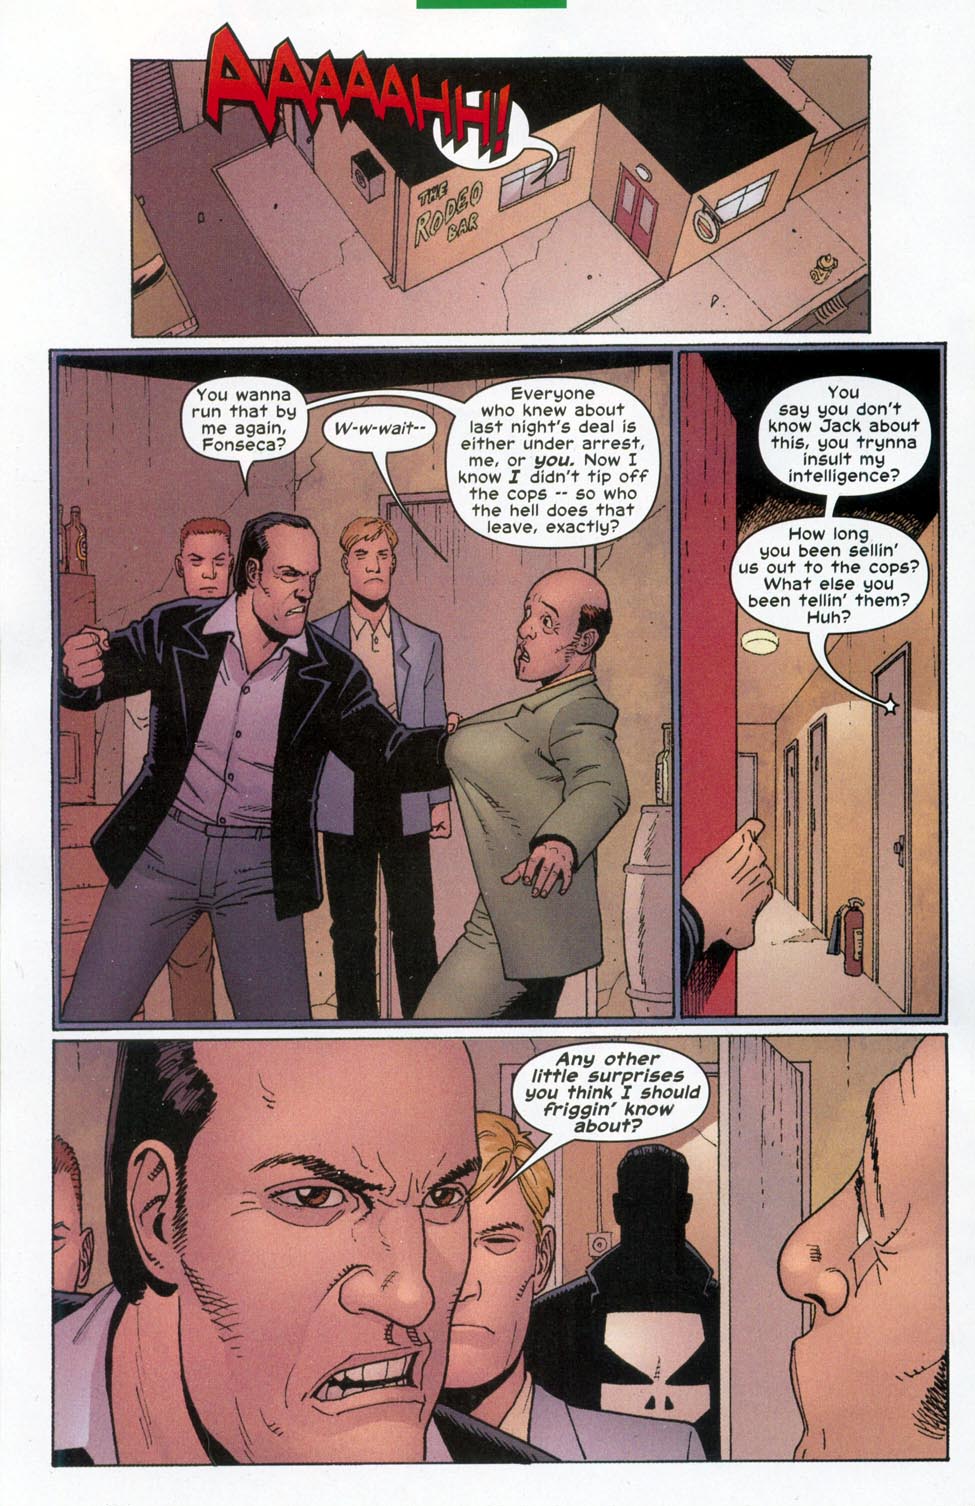 The Punisher (2001) issue 20 - Brotherhood #01 - Page 13